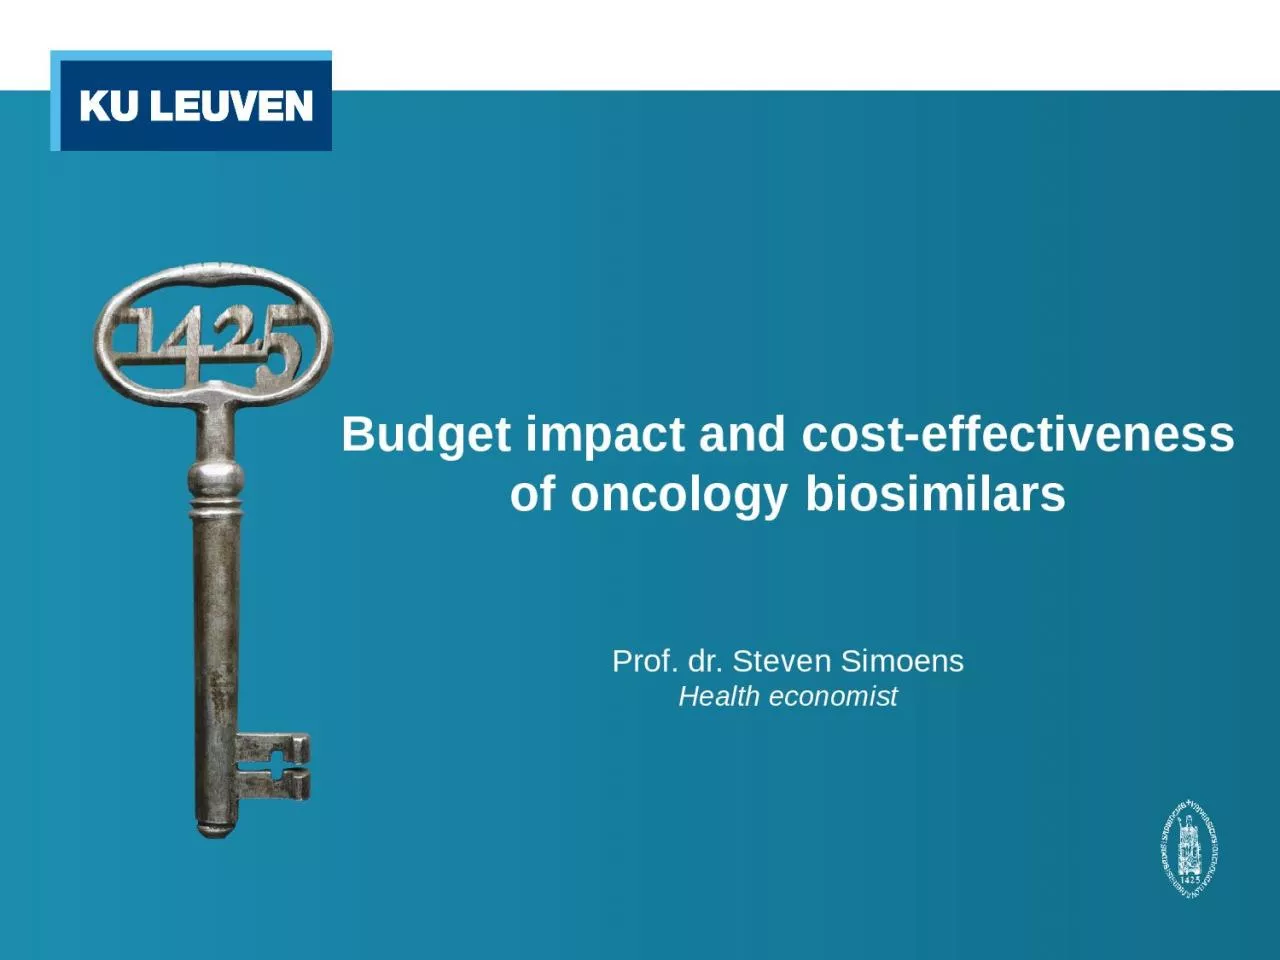 Budget impact and cost-effectiveness of oncology